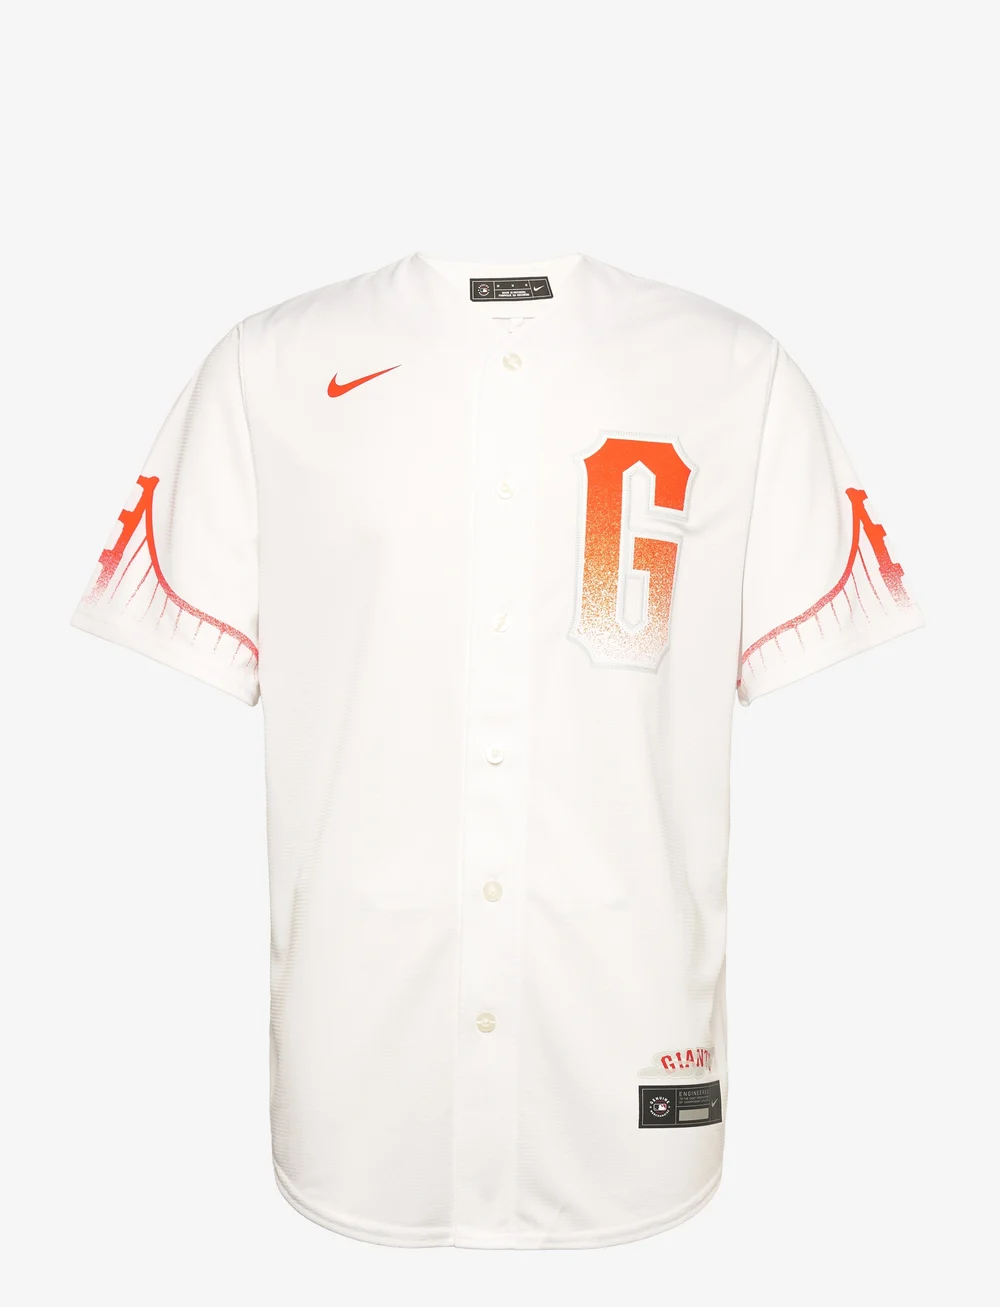 city connect jersey giants